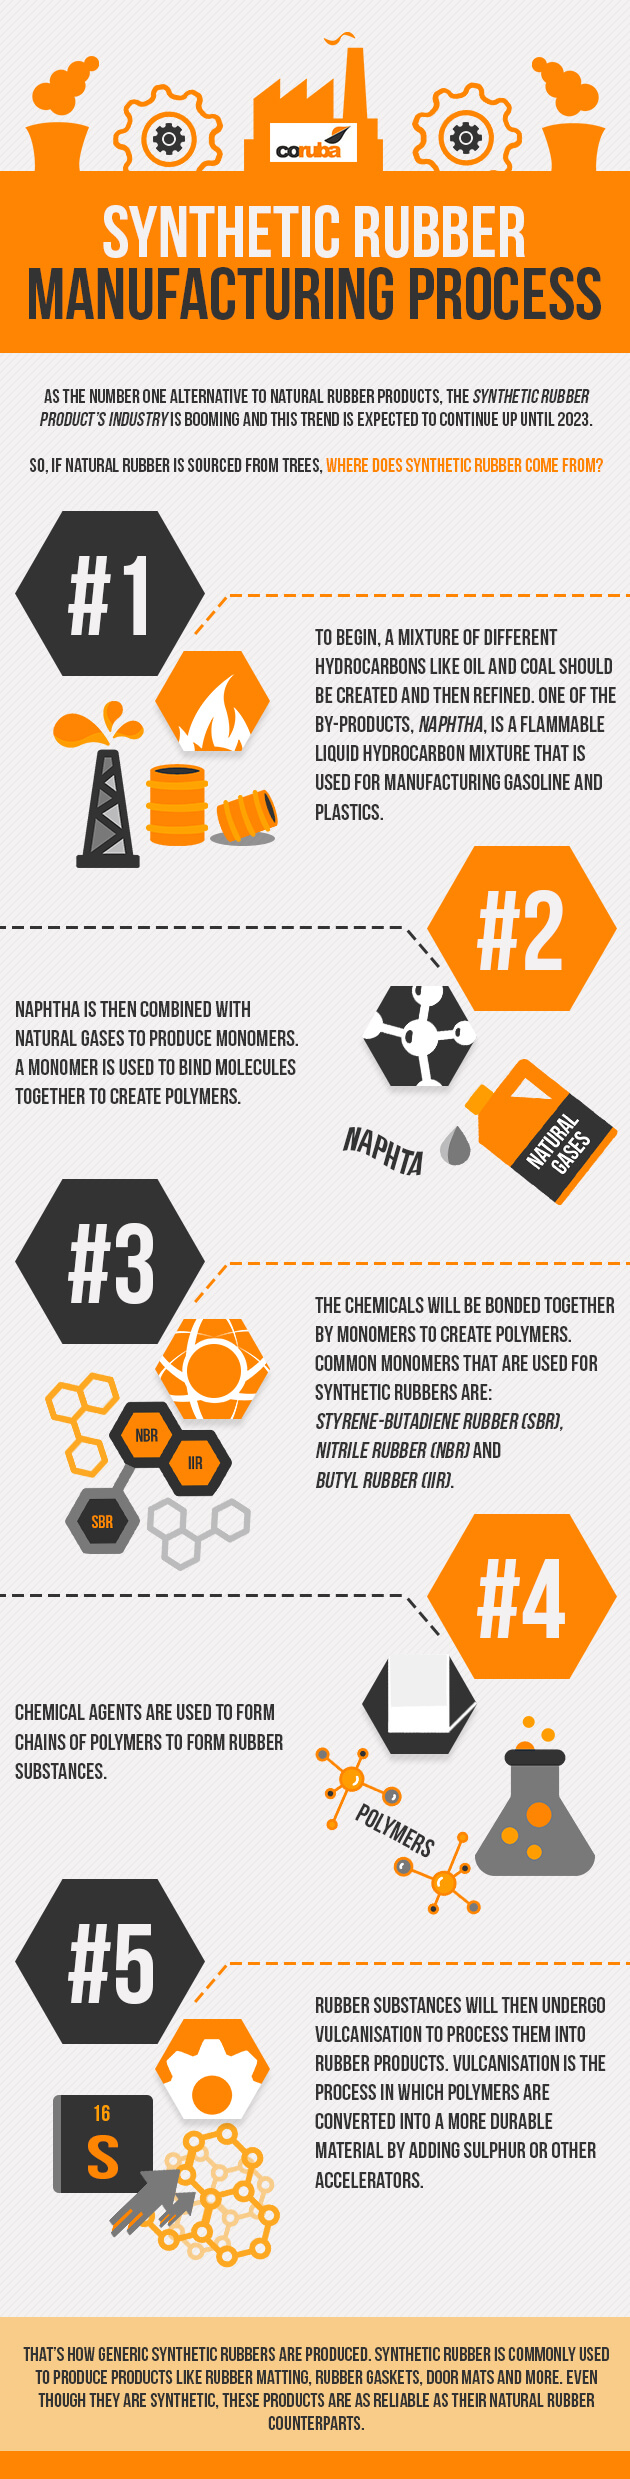 Infographic showing the synthetic rubber manufacturing process